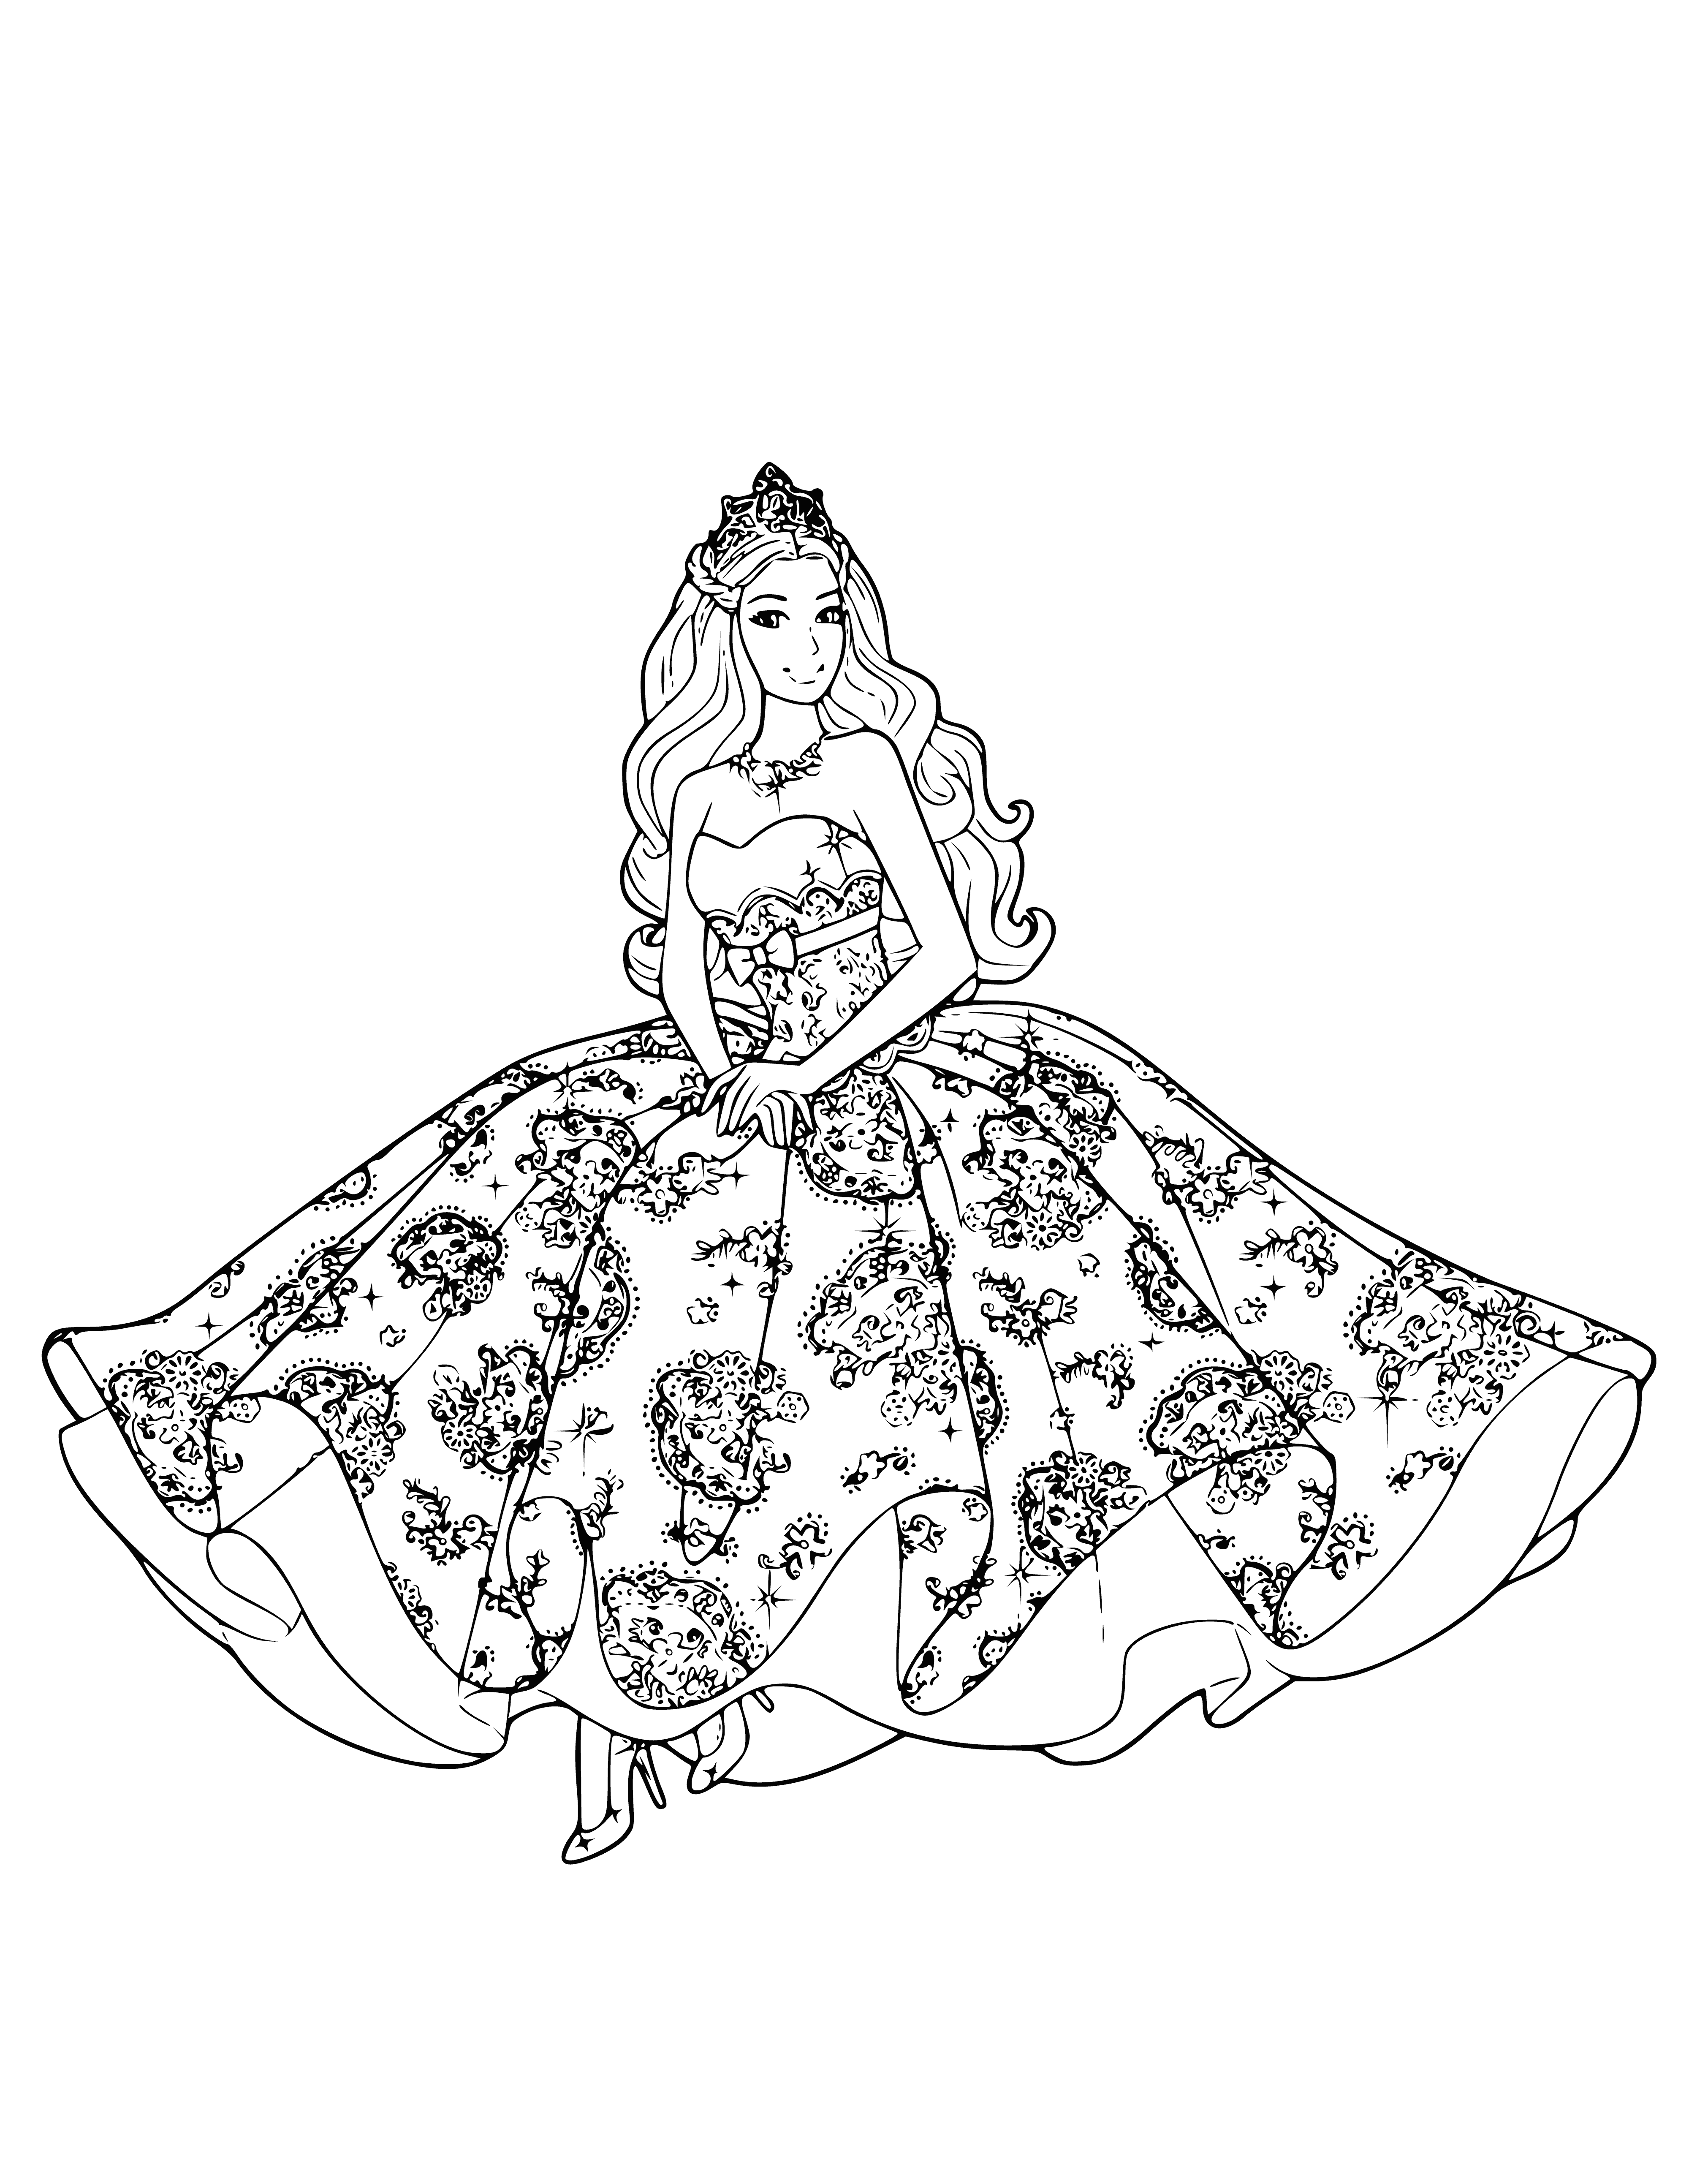 coloring page: Barbie doll looks stunning in her white/black dress, blonde hair and blue eyes! She's admiring her reflection in a mirror.